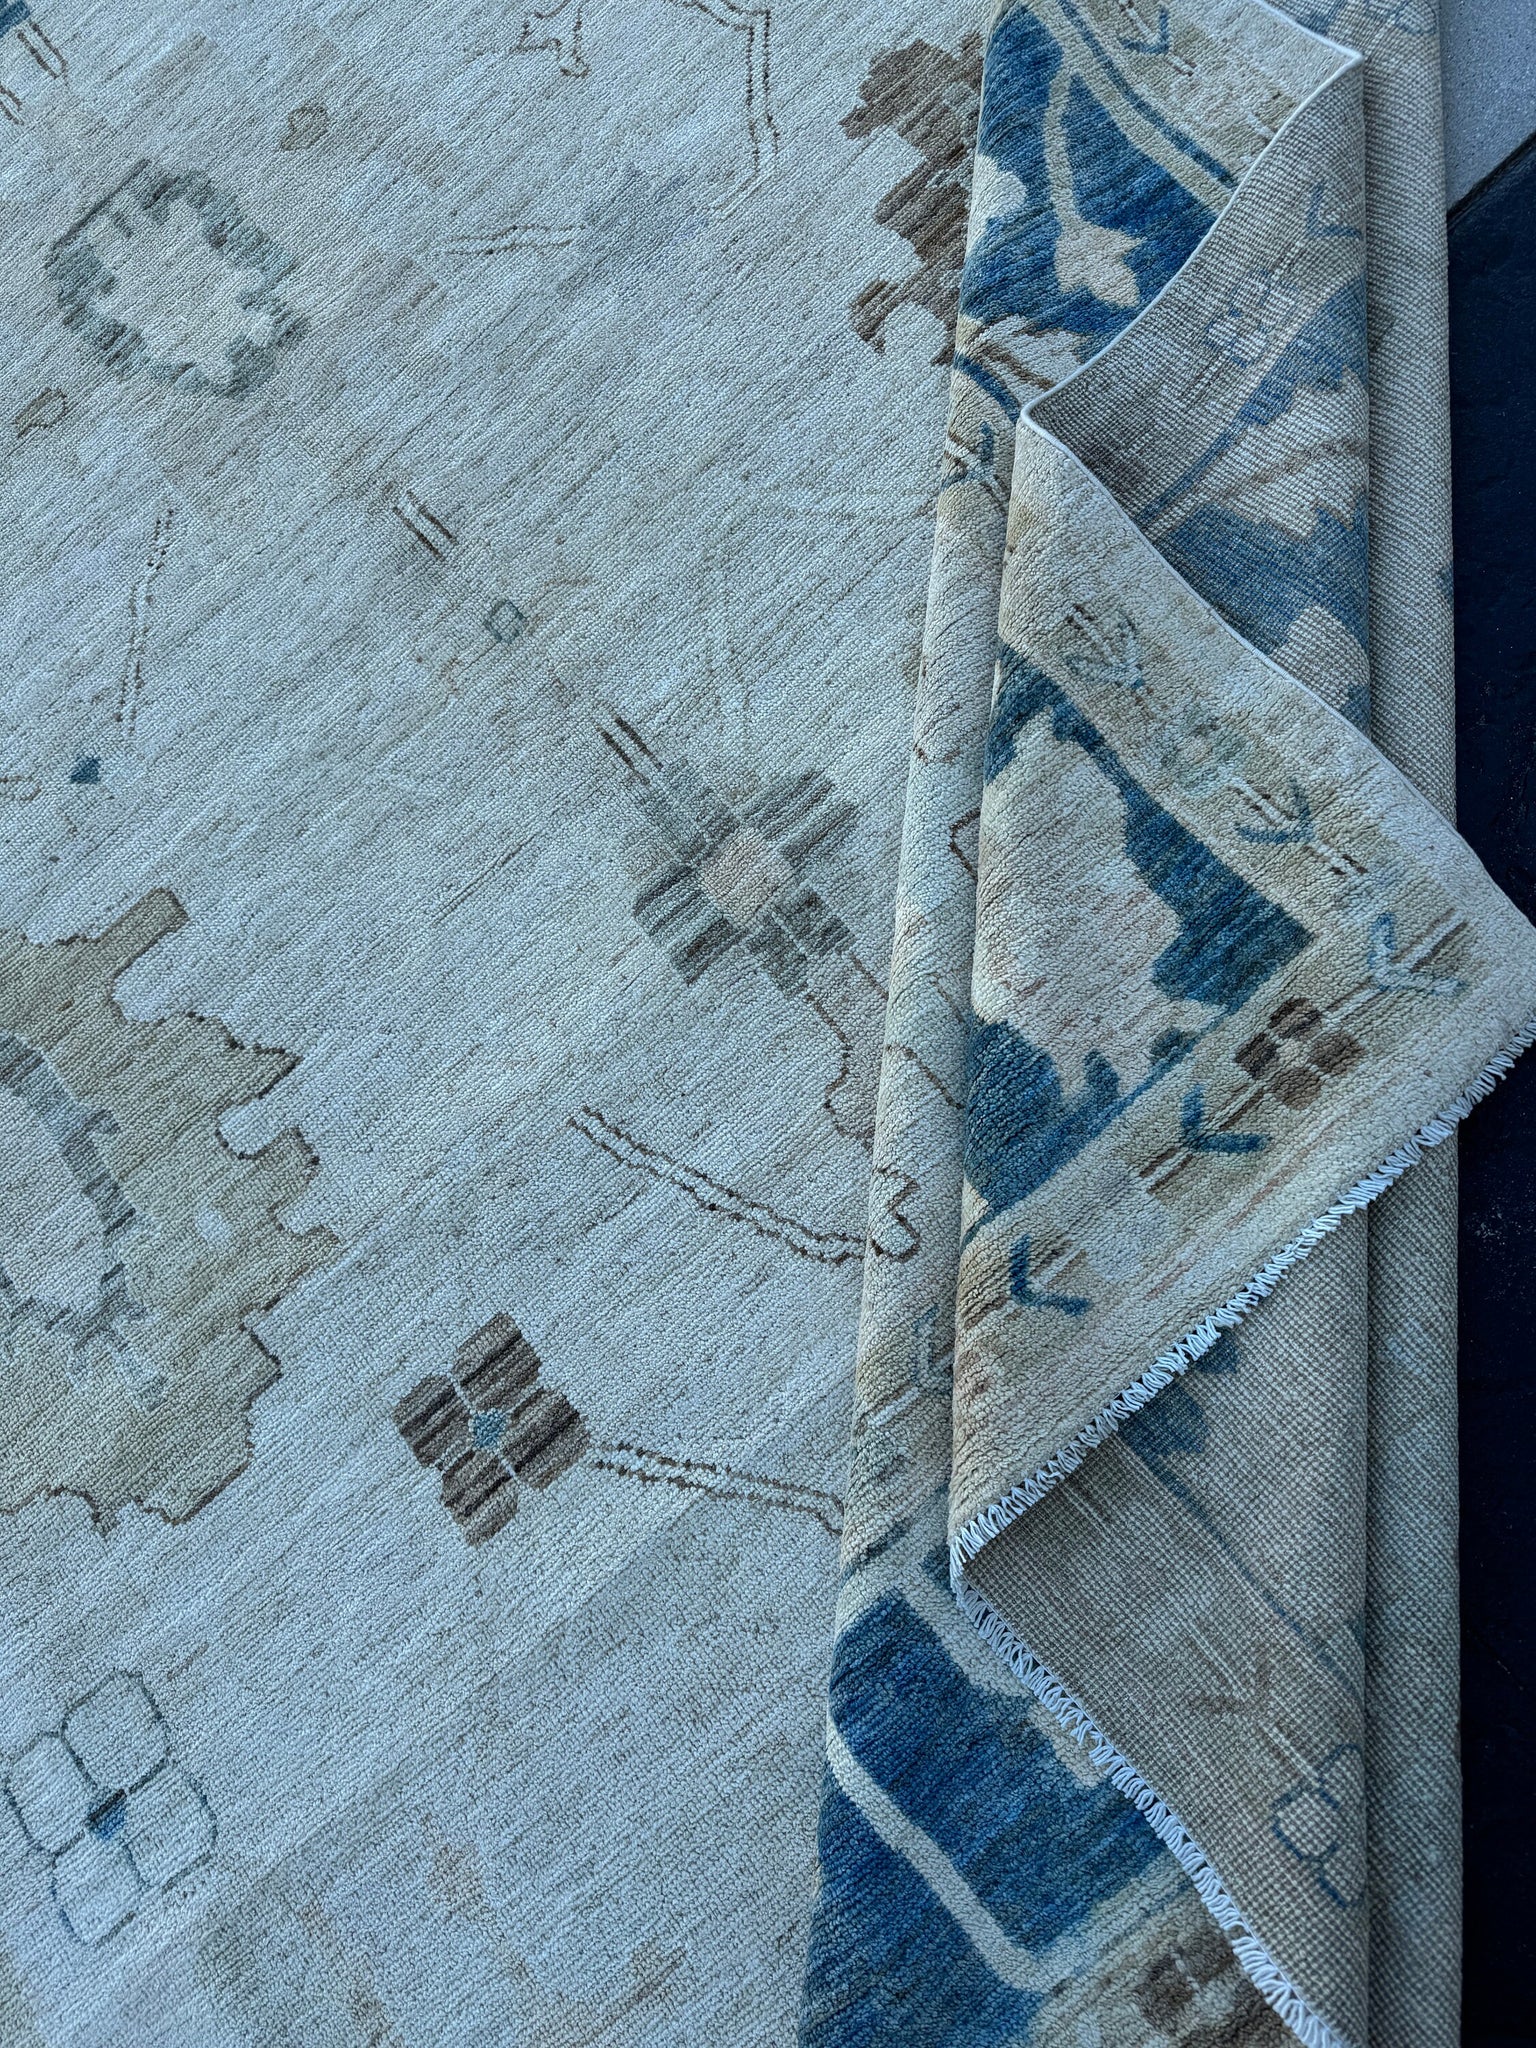 9x11~12 (270x350) Handmade Afghan Rug | Beige Cream White Ivory Denim Blue Taupe Coffee Brown | Wool Oushak Hand Knotted Tribal Floral